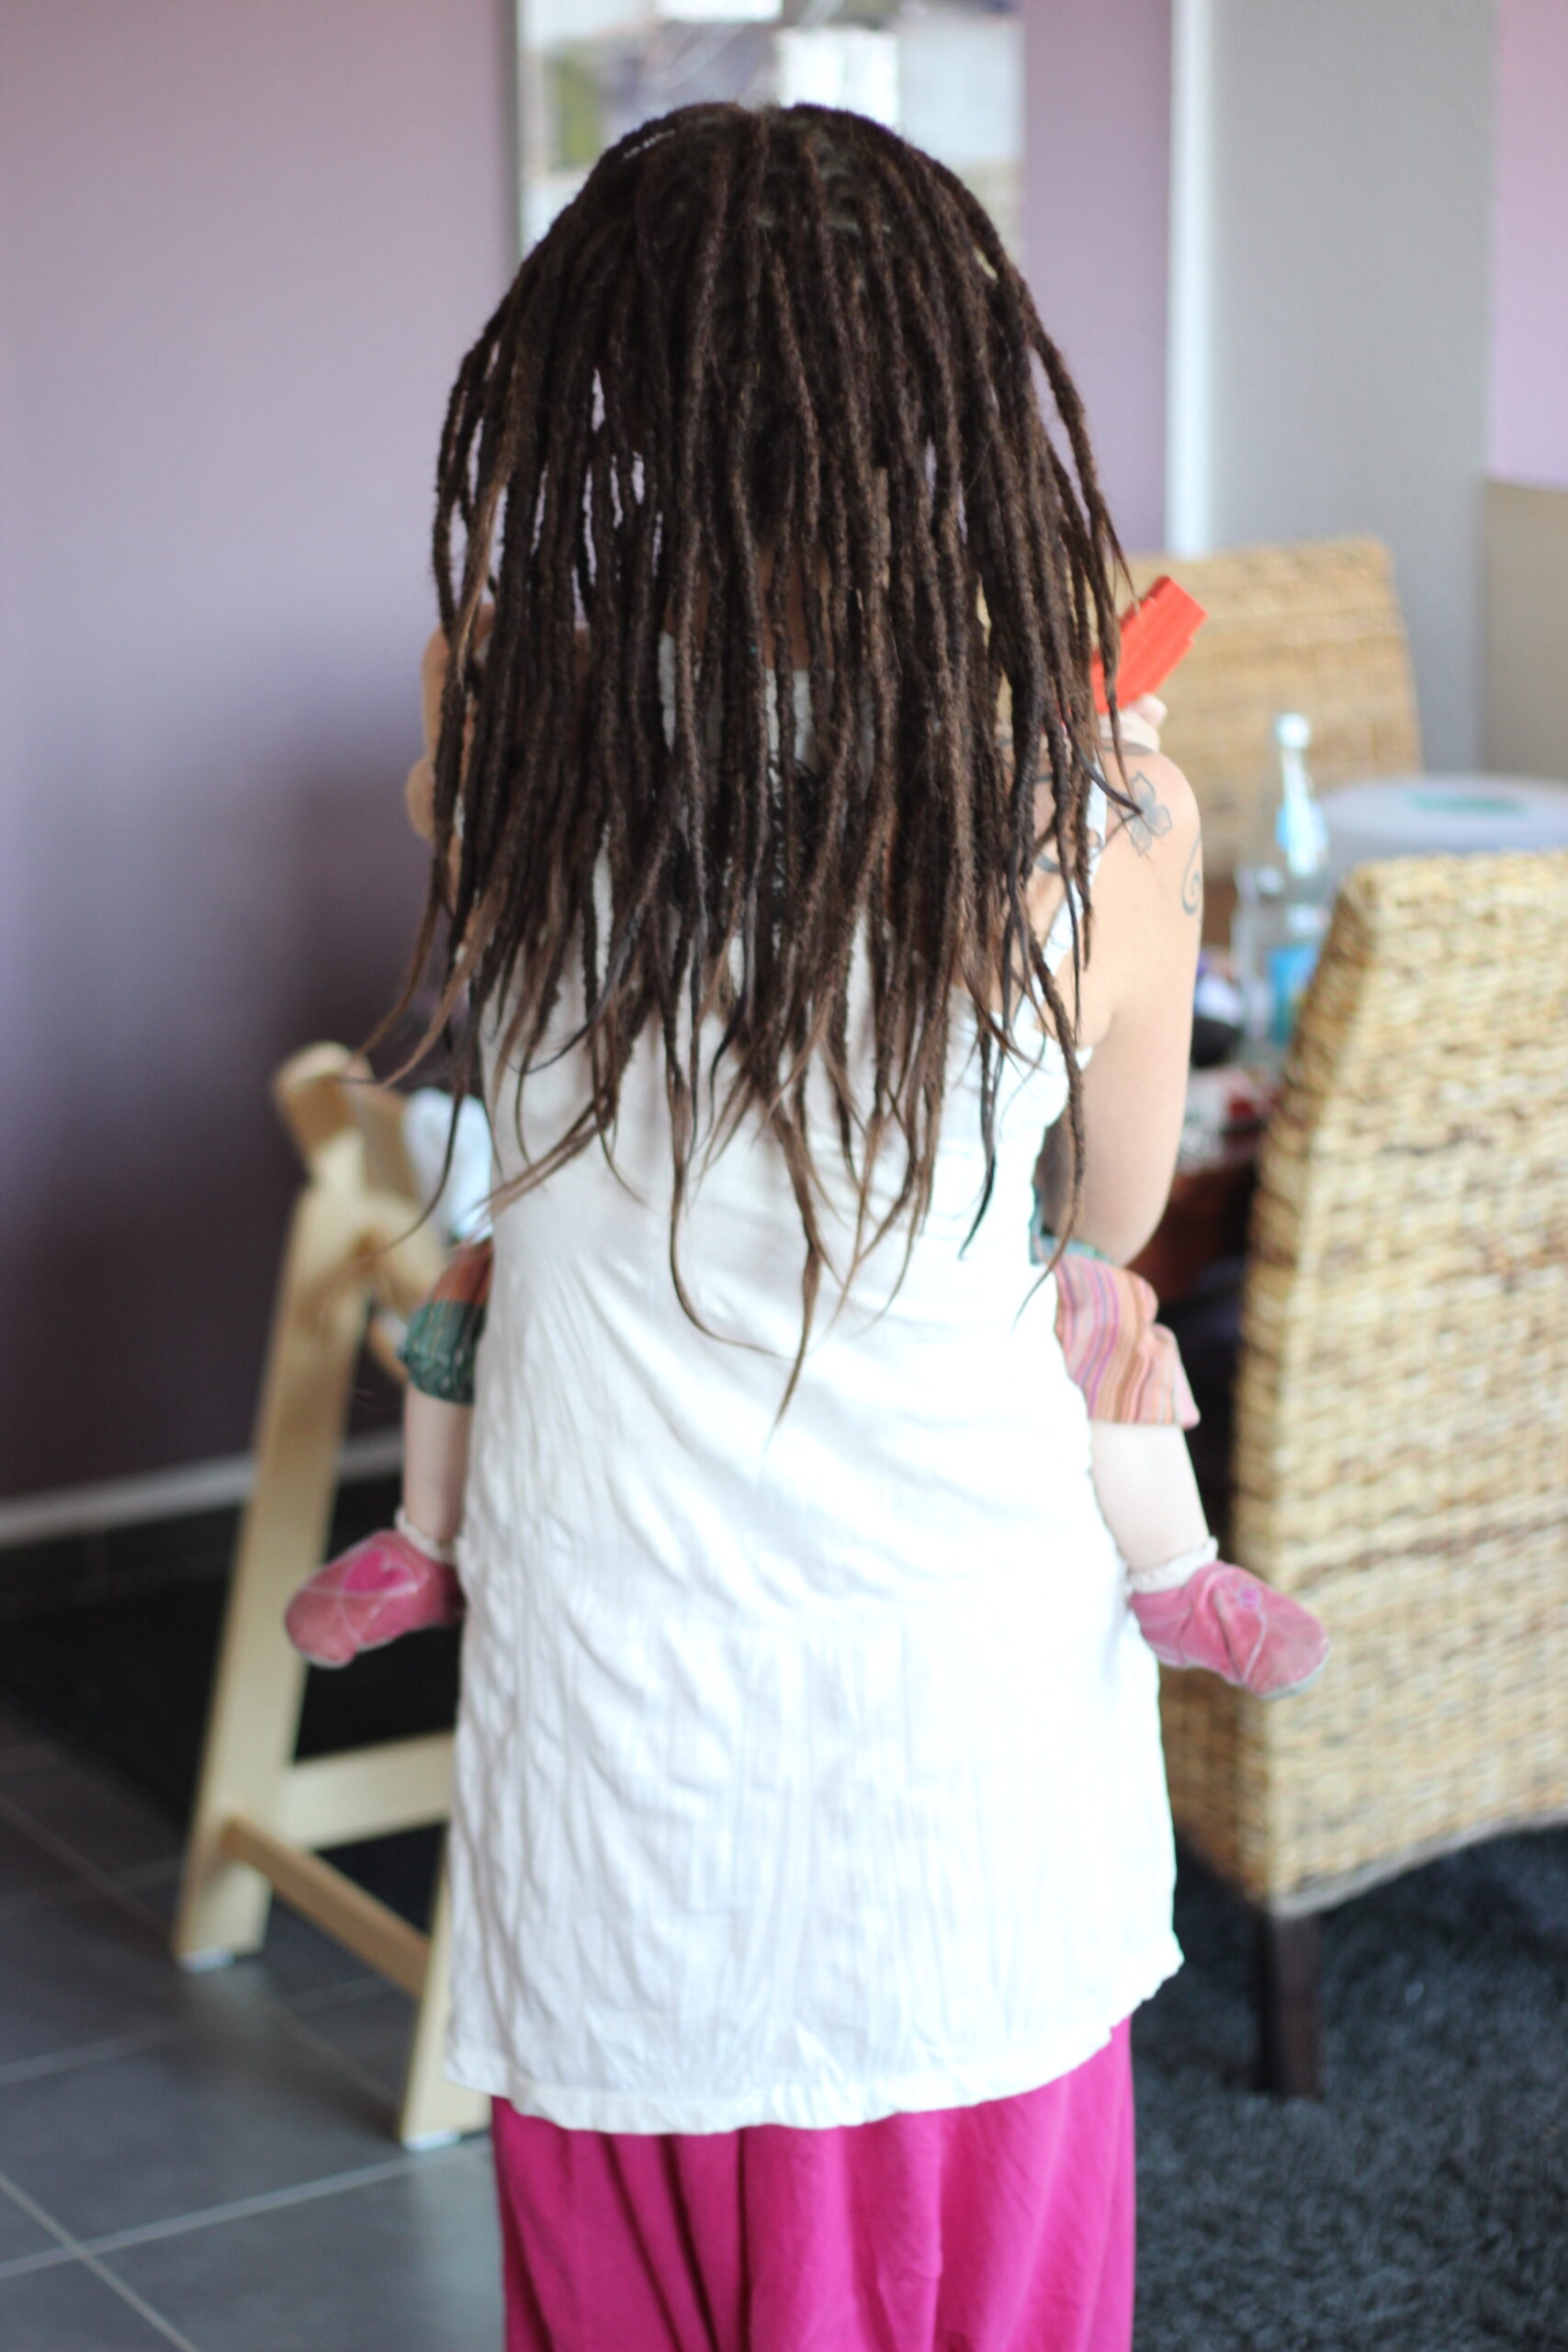 Girl with Dreadlocks and Baby